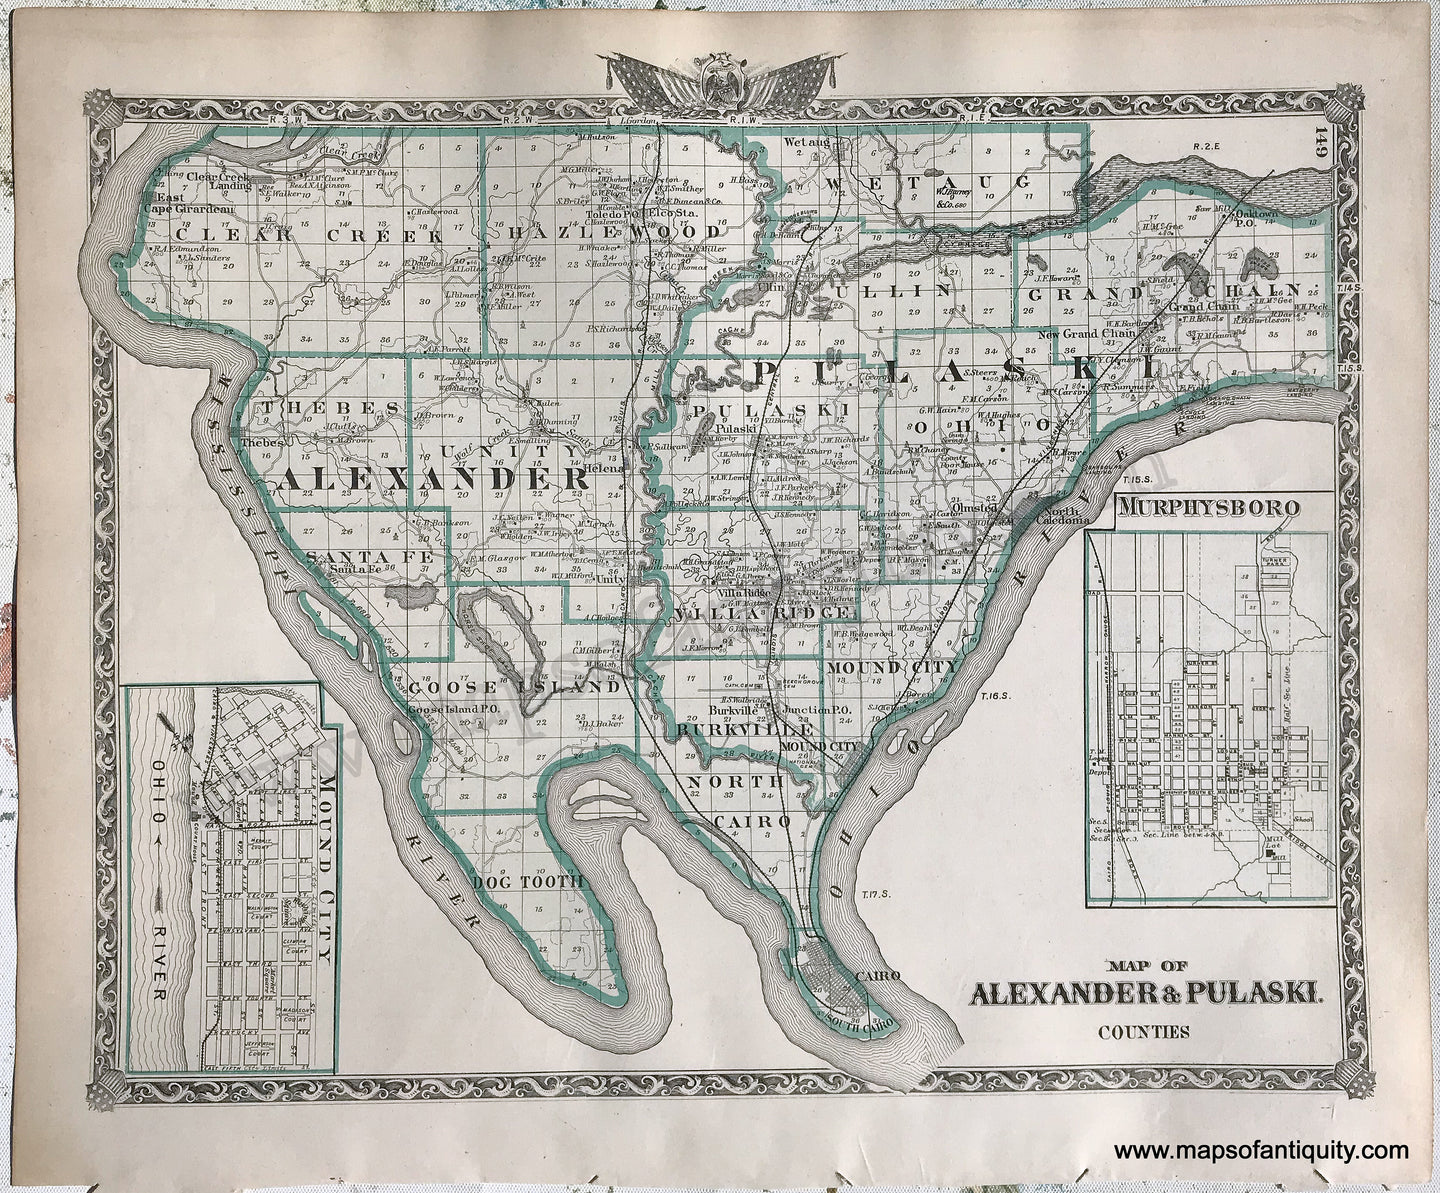 Antique-Hand-Colored-Map-Map-of-Alexander-&-Pulaski-Counties;-verso:-Four-small-cities-of-Illinois-1876-Warner-&-Beers-/-Union-Atlas-Co.-Midwest-1800s-19th-century-Maps-of-Antiquity